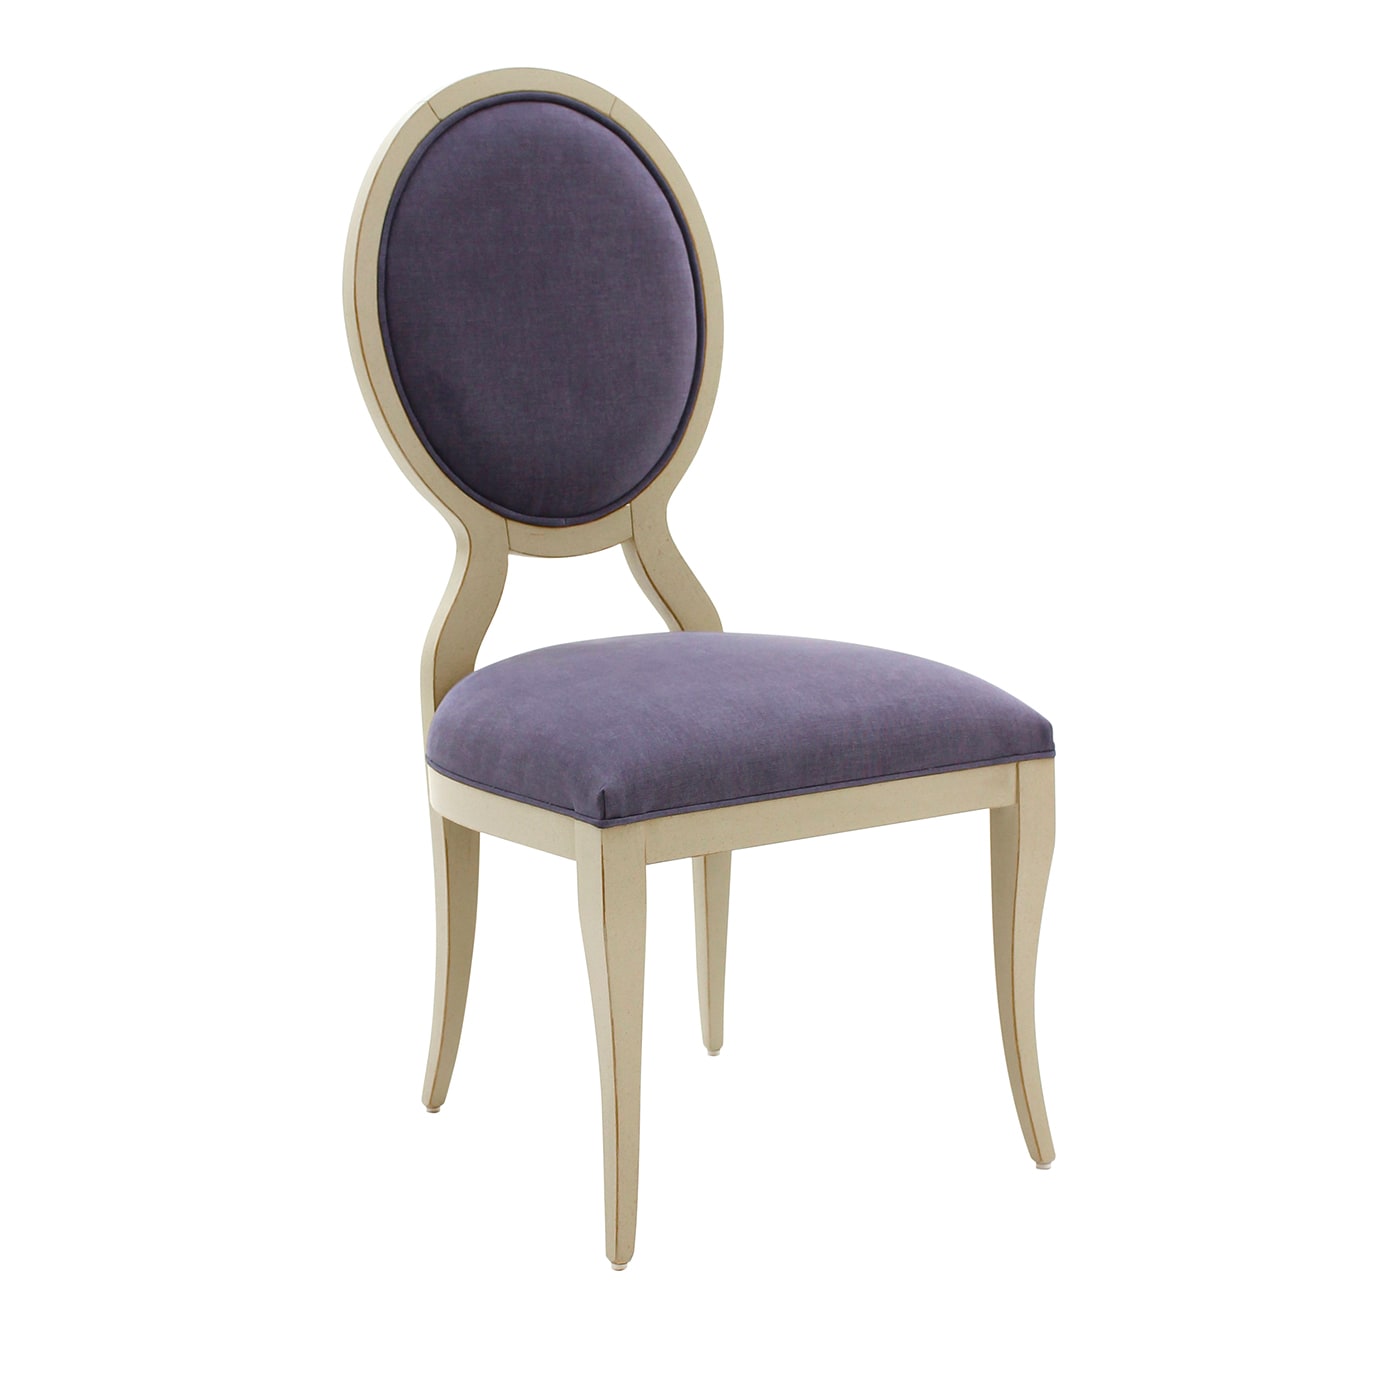 Set of 2 White and Antiqued Blue Chairs - Palmobili